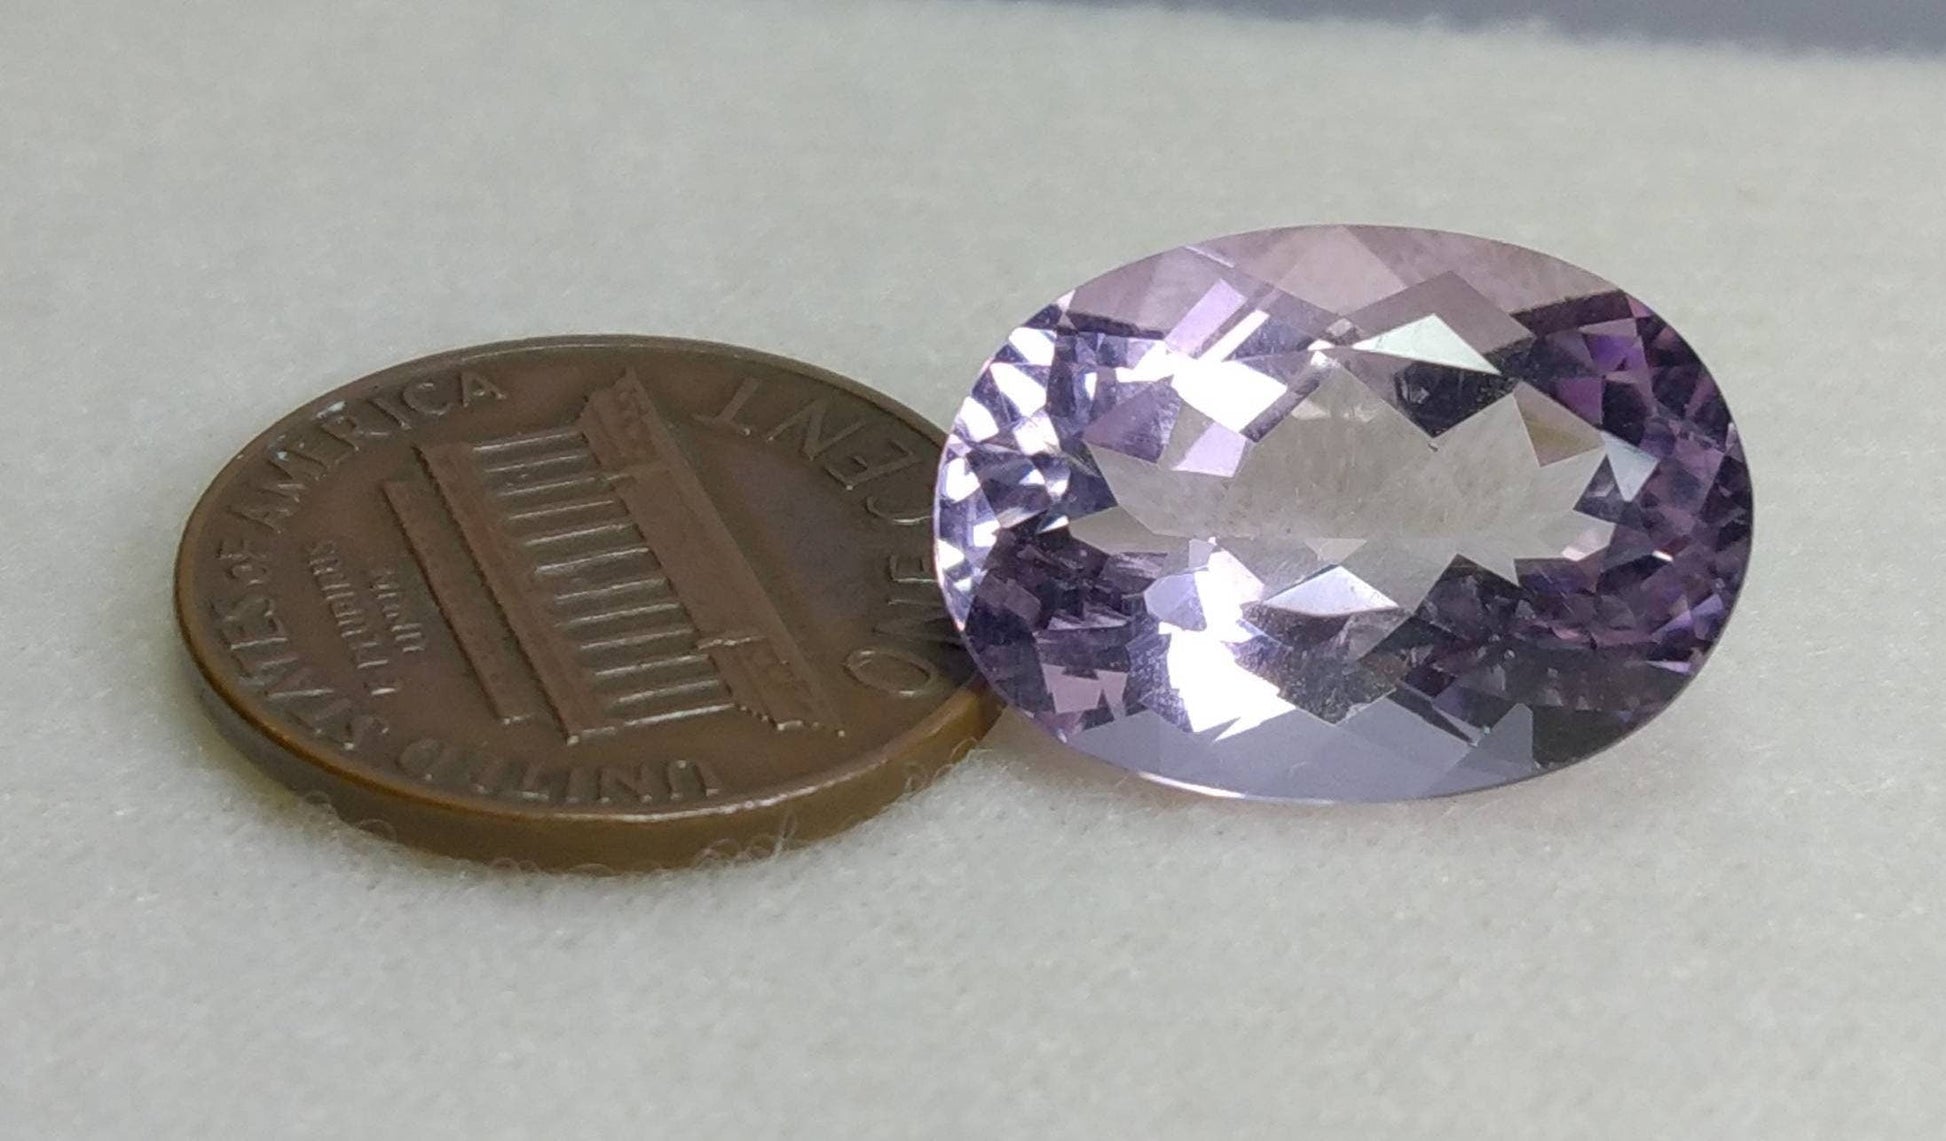 ARSAA GEMS AND MINERALSNatural top quality beautiful 8.5 carats VV clarity faceted oval shape kunzite gem - Premium  from ARSAA GEMS AND MINERALS - Just $27.00! Shop now at ARSAA GEMS AND MINERALS